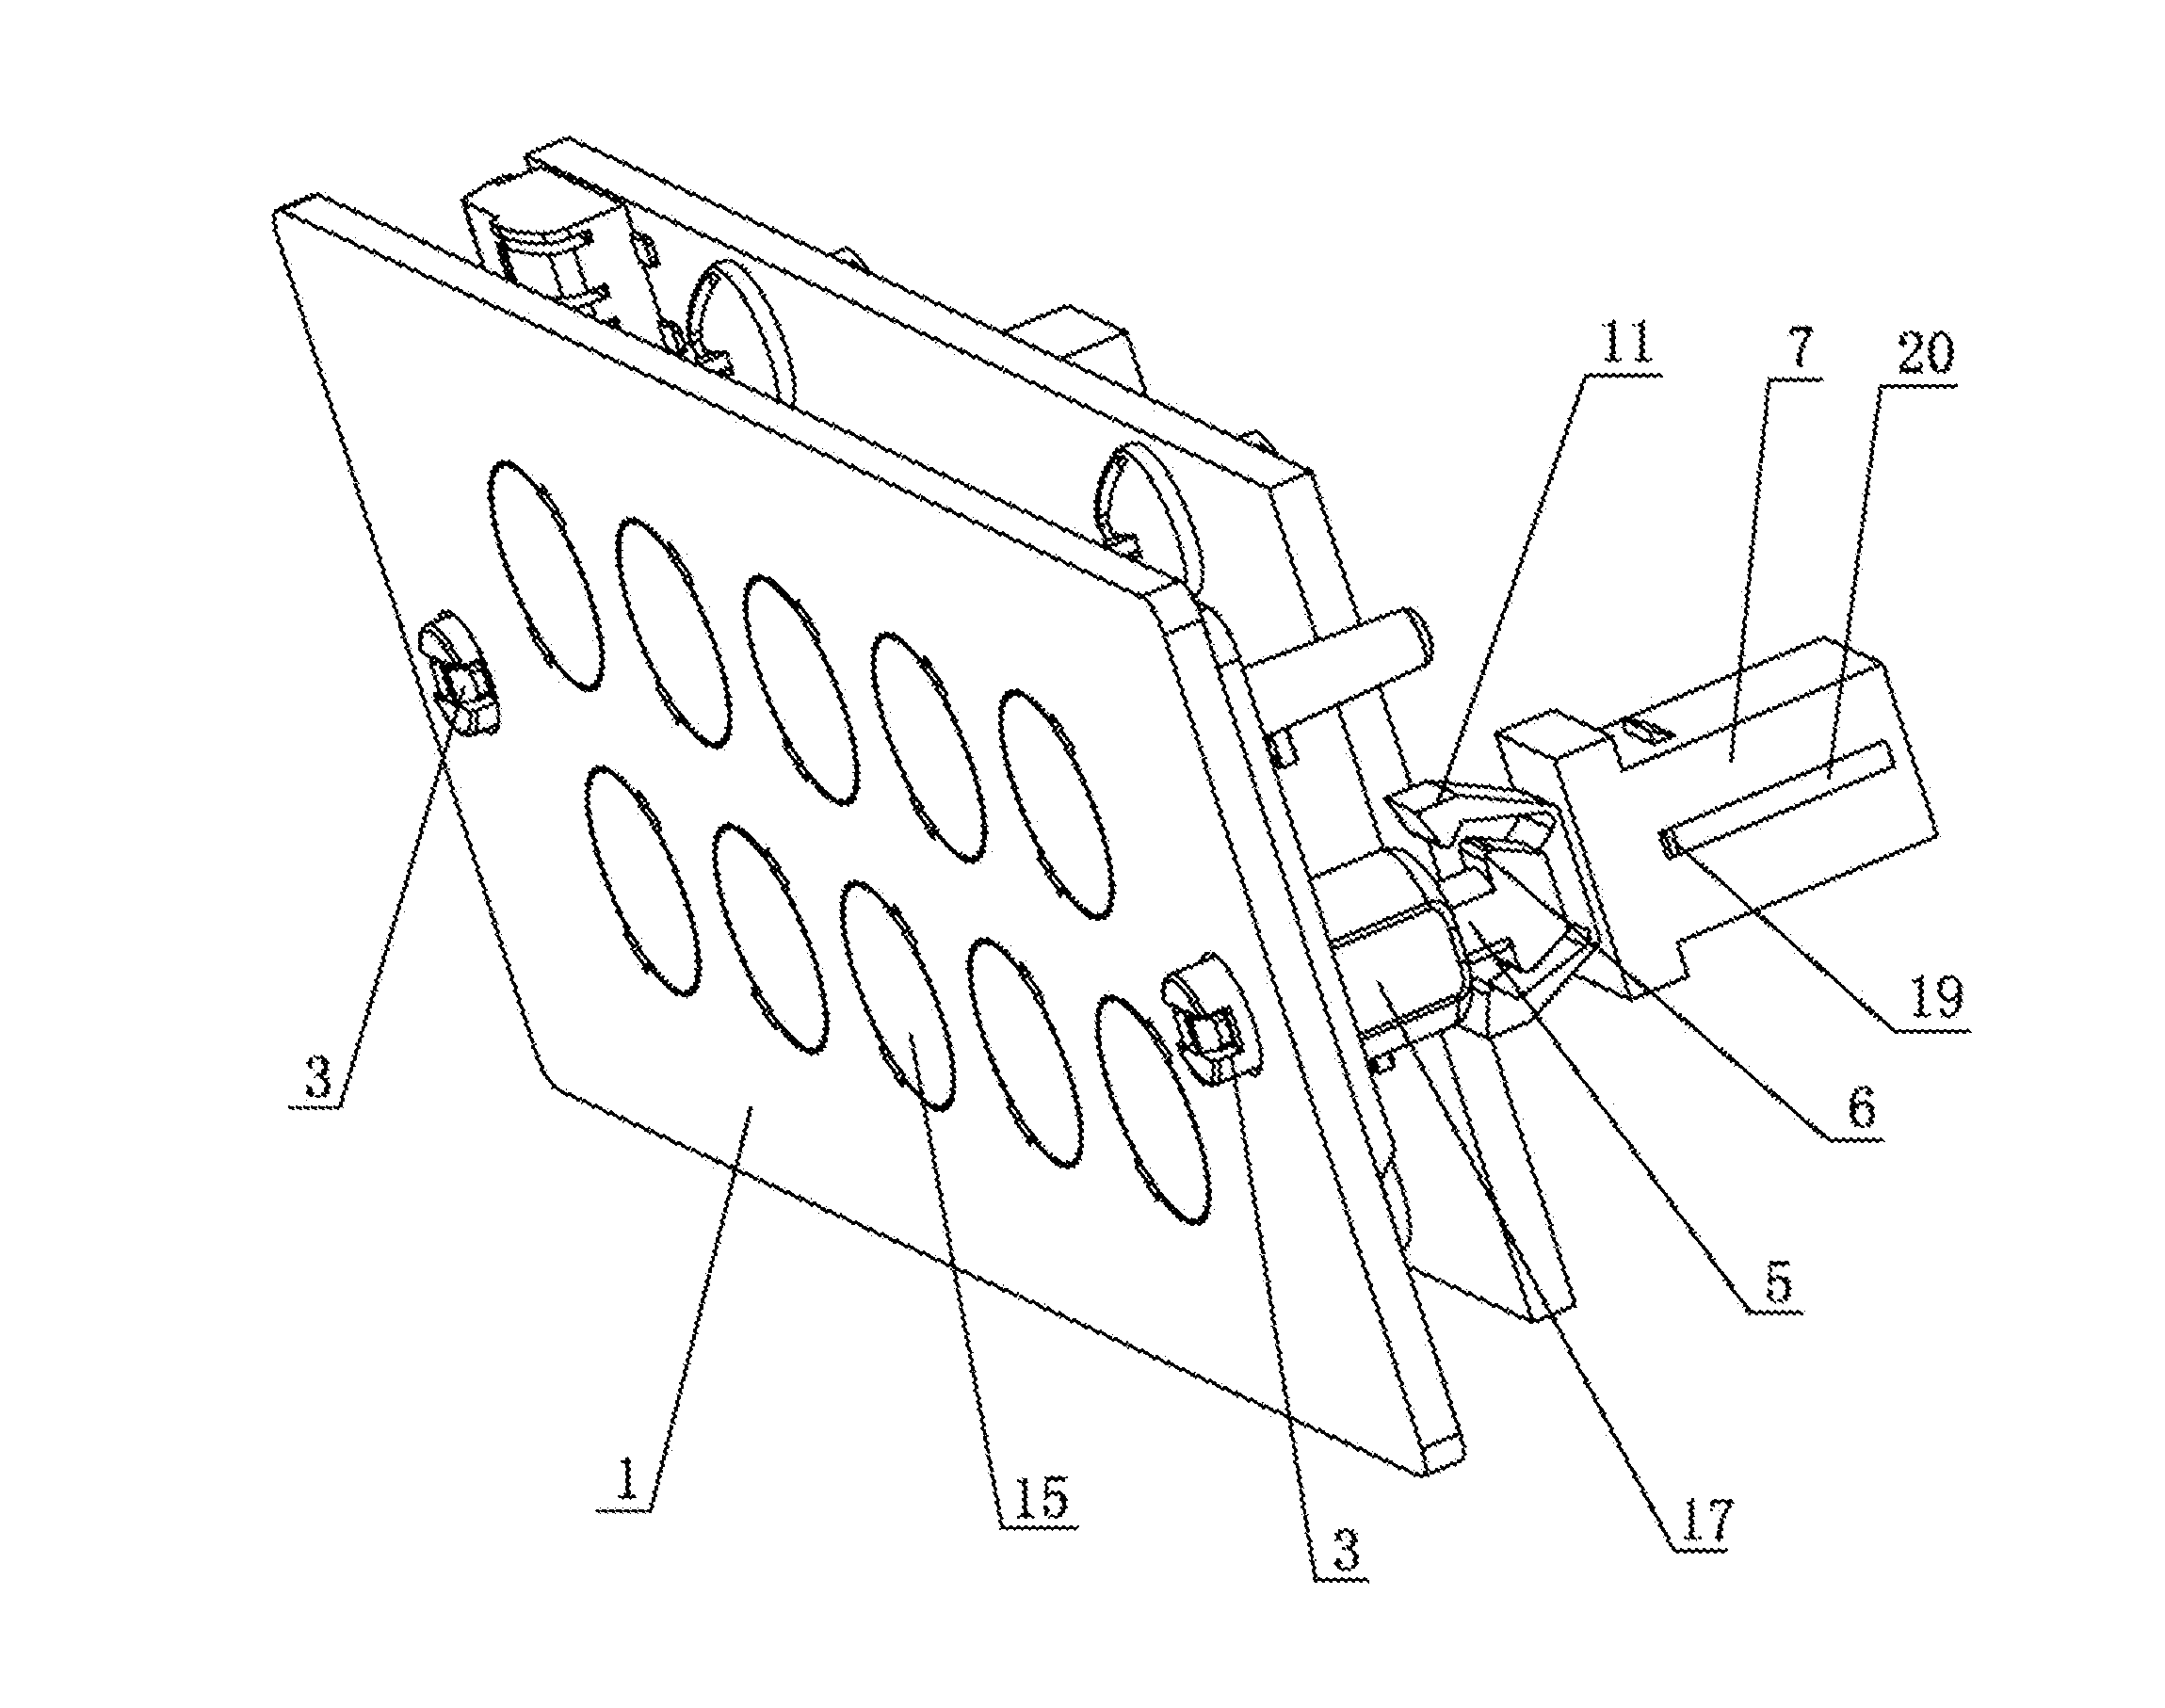 Connecting device for light fixtures